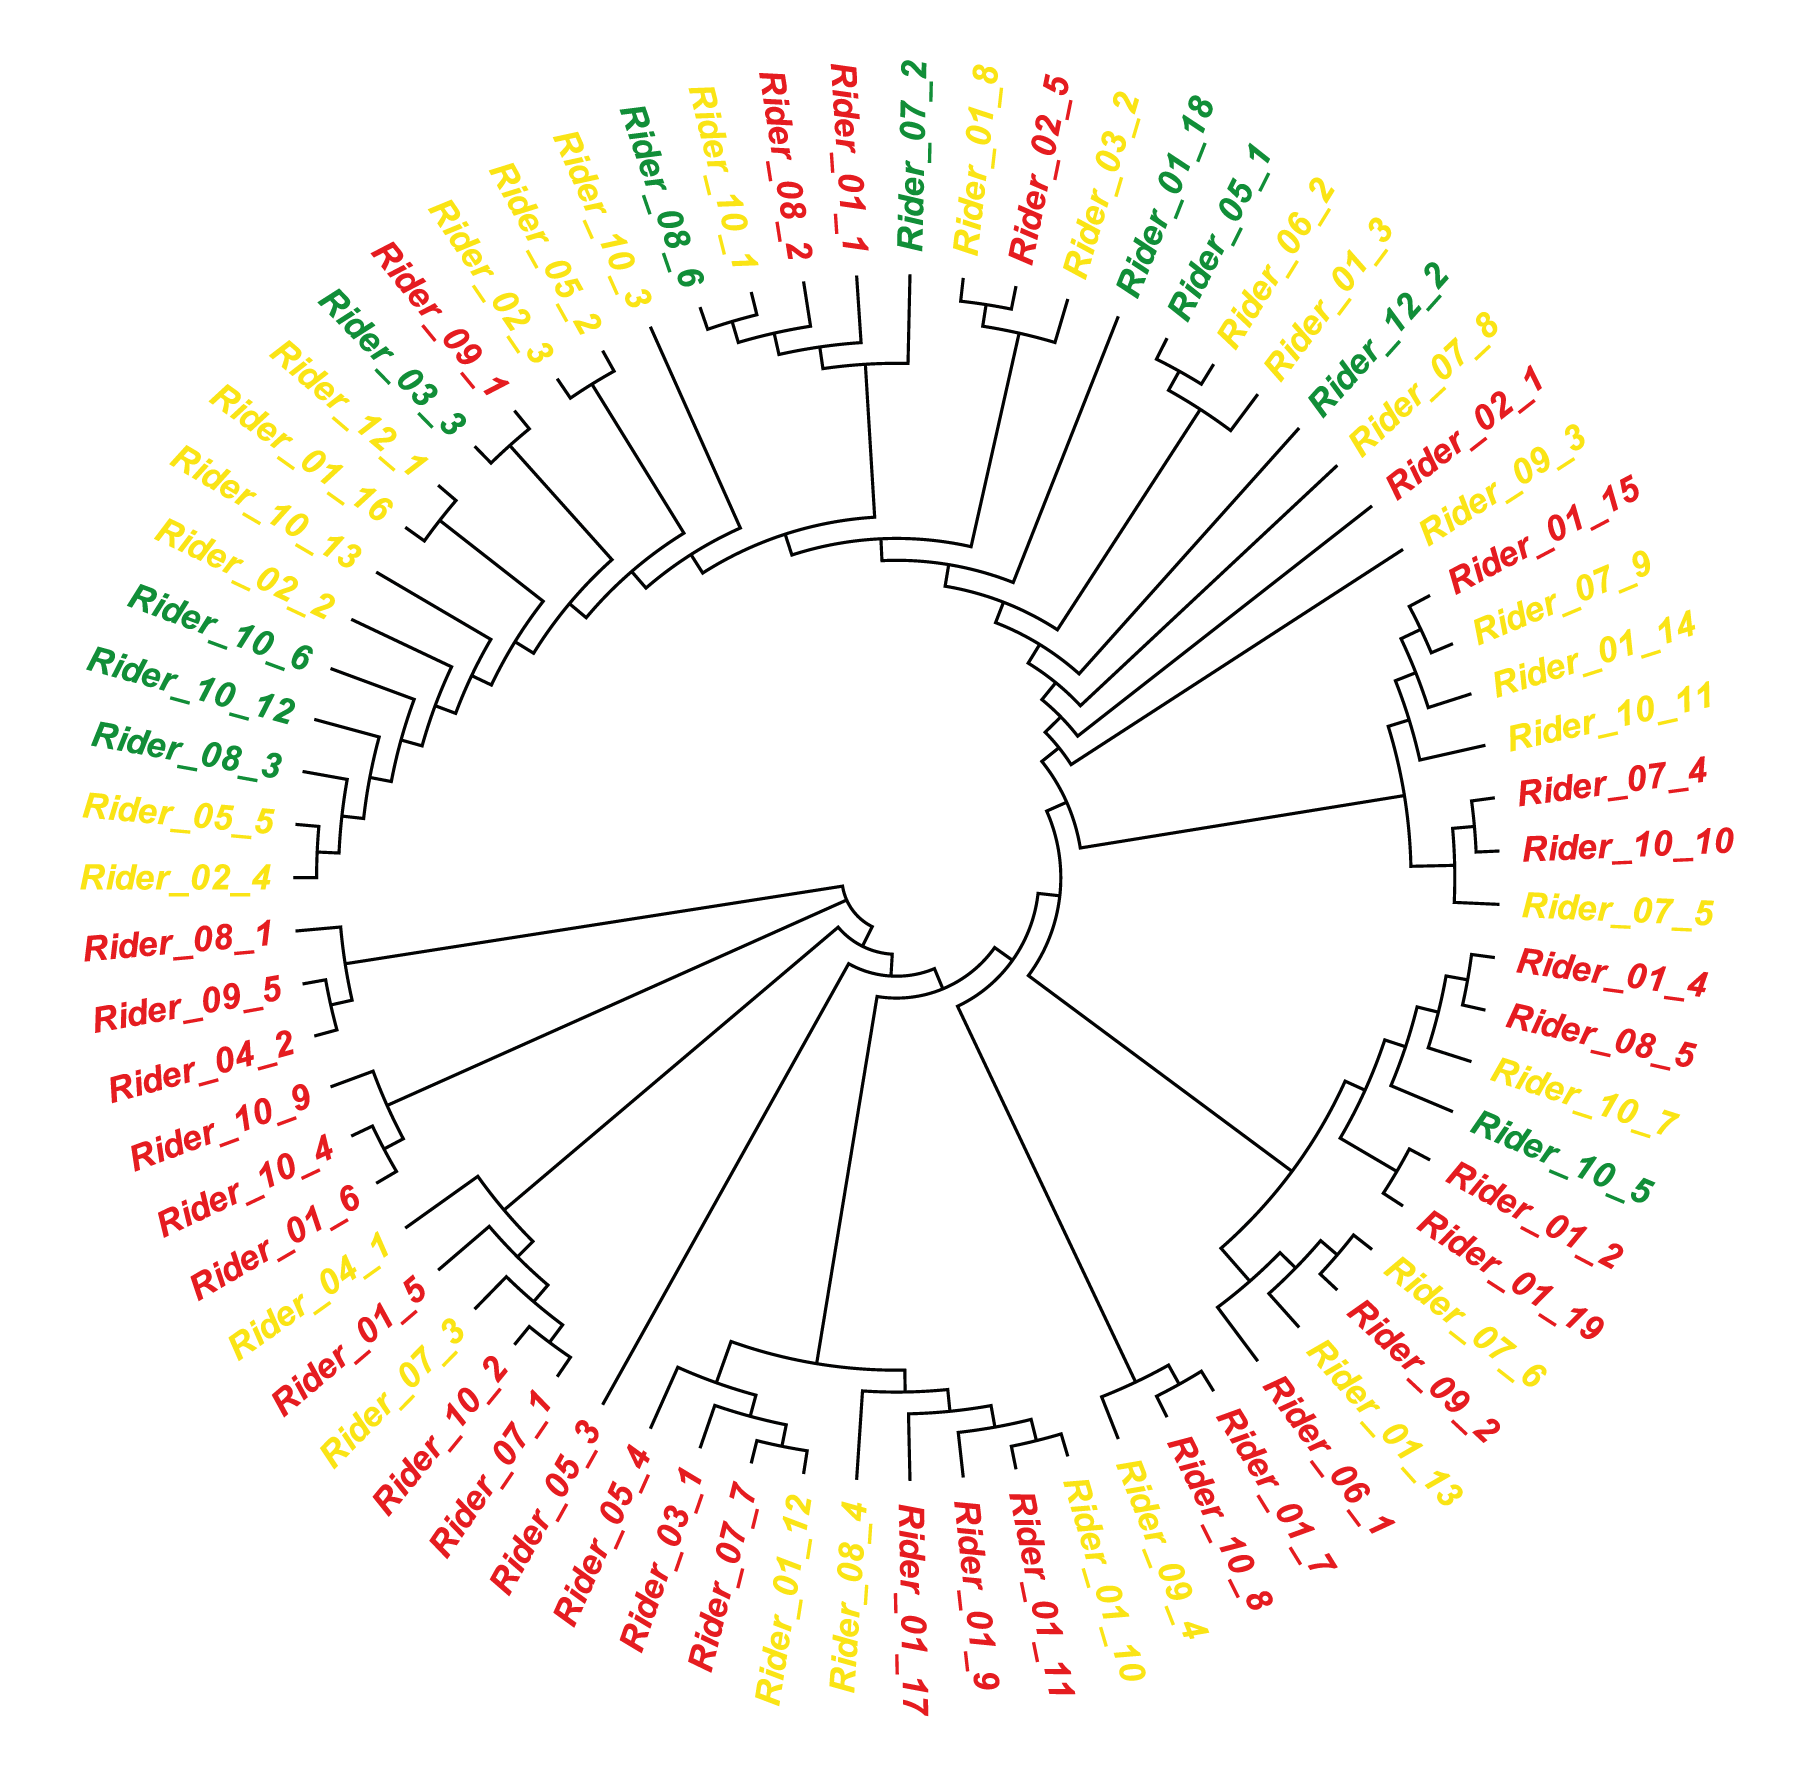 The Paszkowski research team mapped the Rider elements on a phylogenetic tree to gain a better understanding of how old the different Rider transposons are in evolutionary terms.